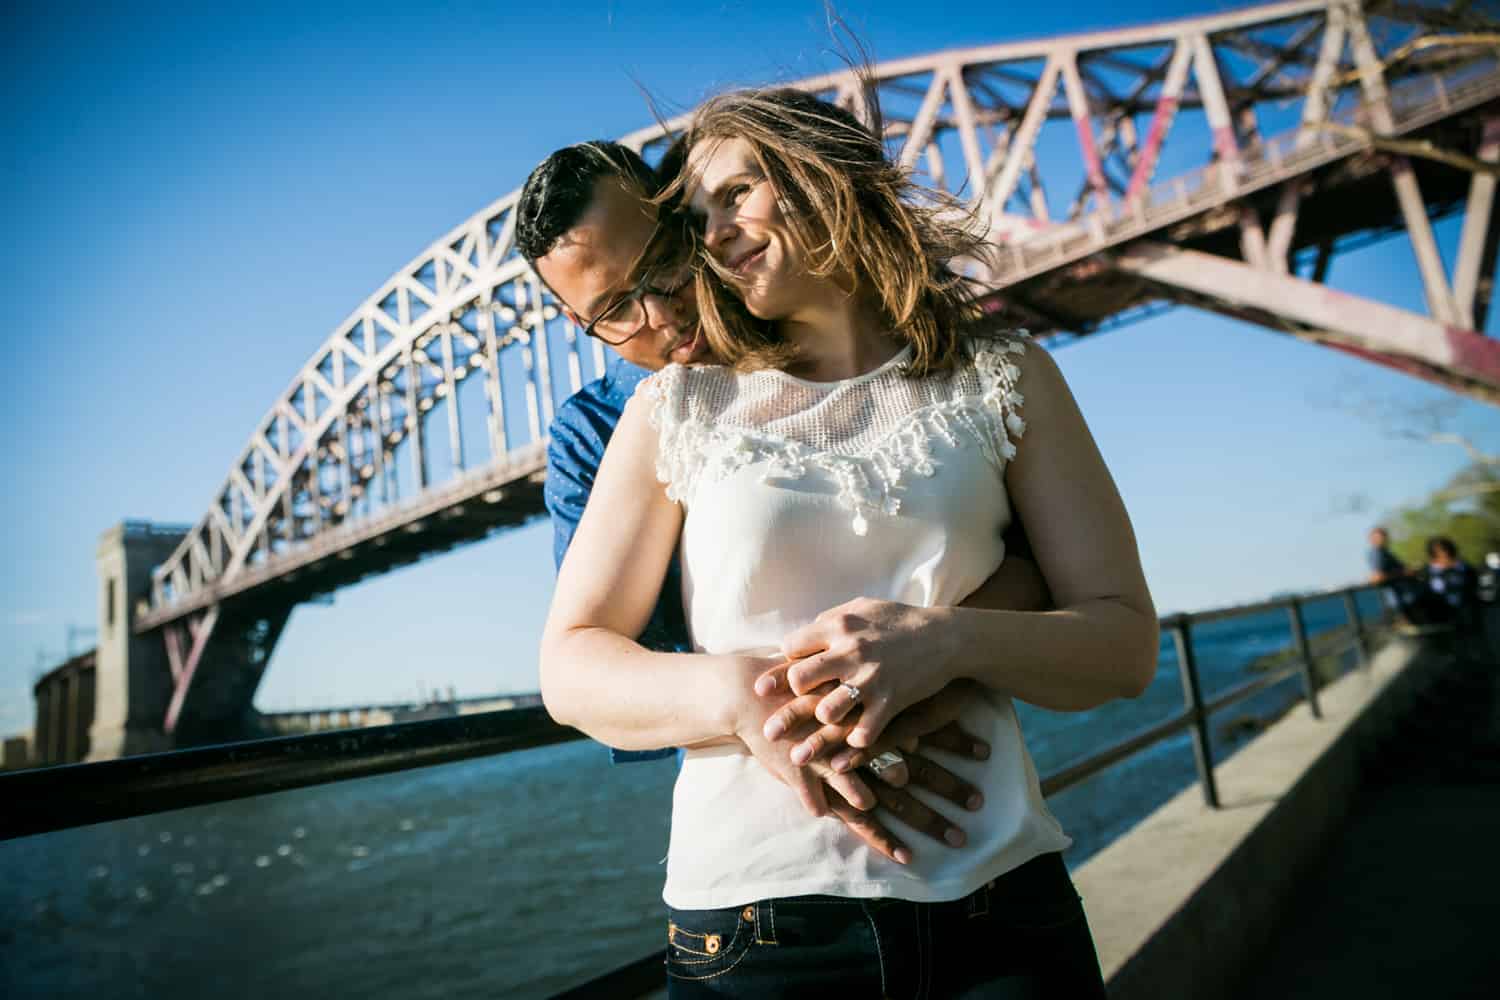 Couple hugging in front of Hellgate Bridge during an Astoria Park engagement shoot